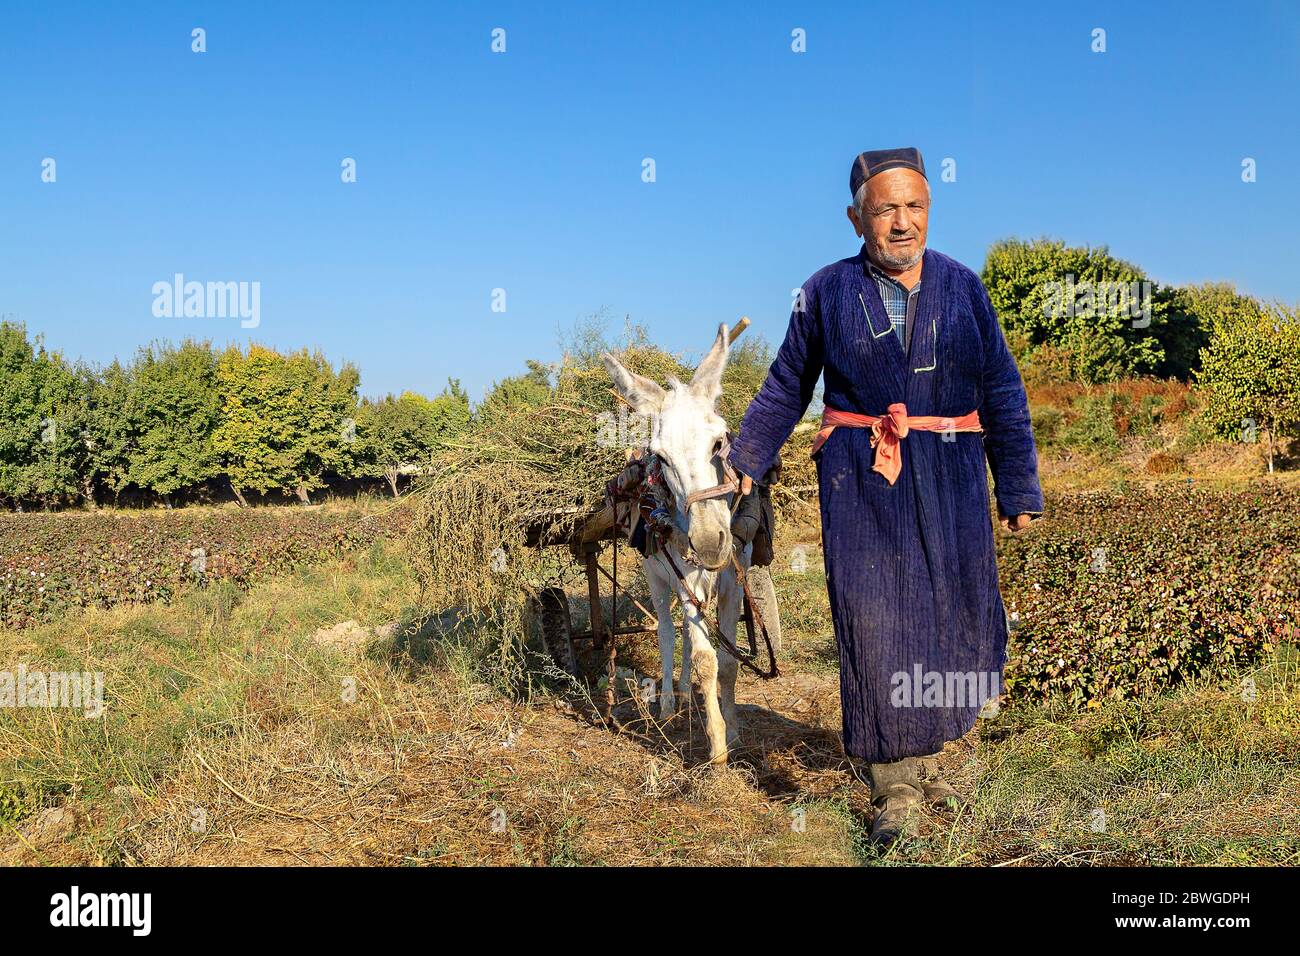 Elderly Uzbek man in local dress in the agricultural field, in the outskirts of Samarkand, Uzbekistan Stock Photo